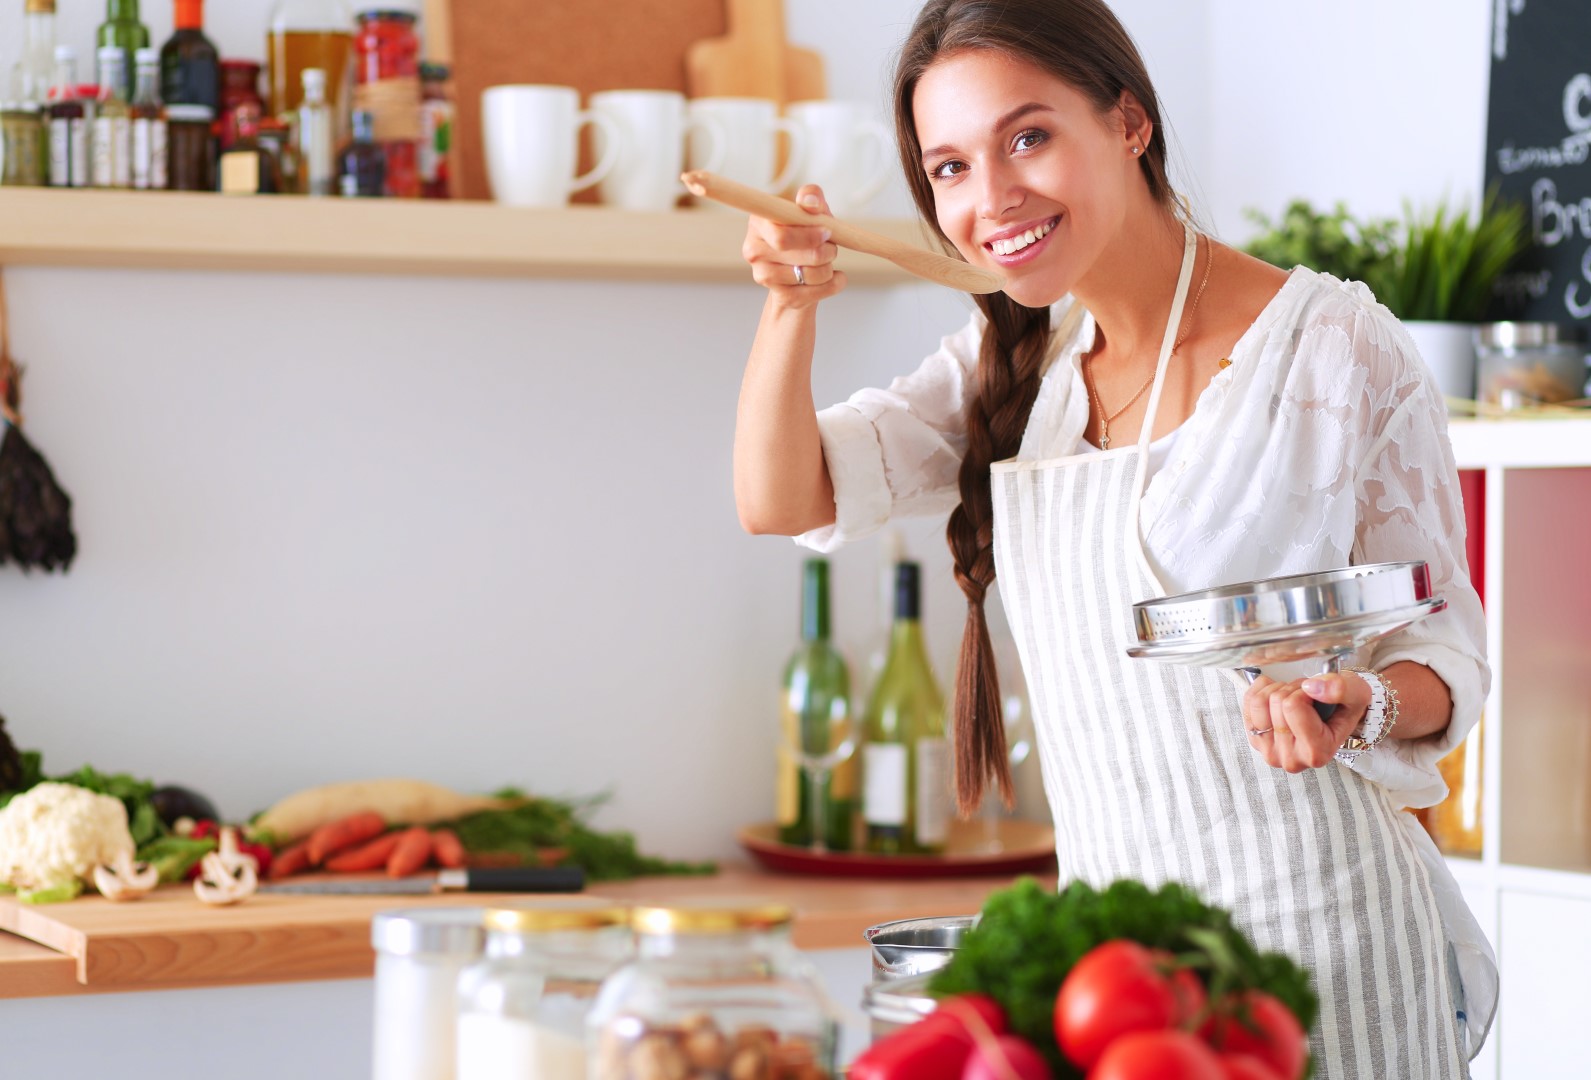 10 Simple Cooking Tips to Embrace in 2020